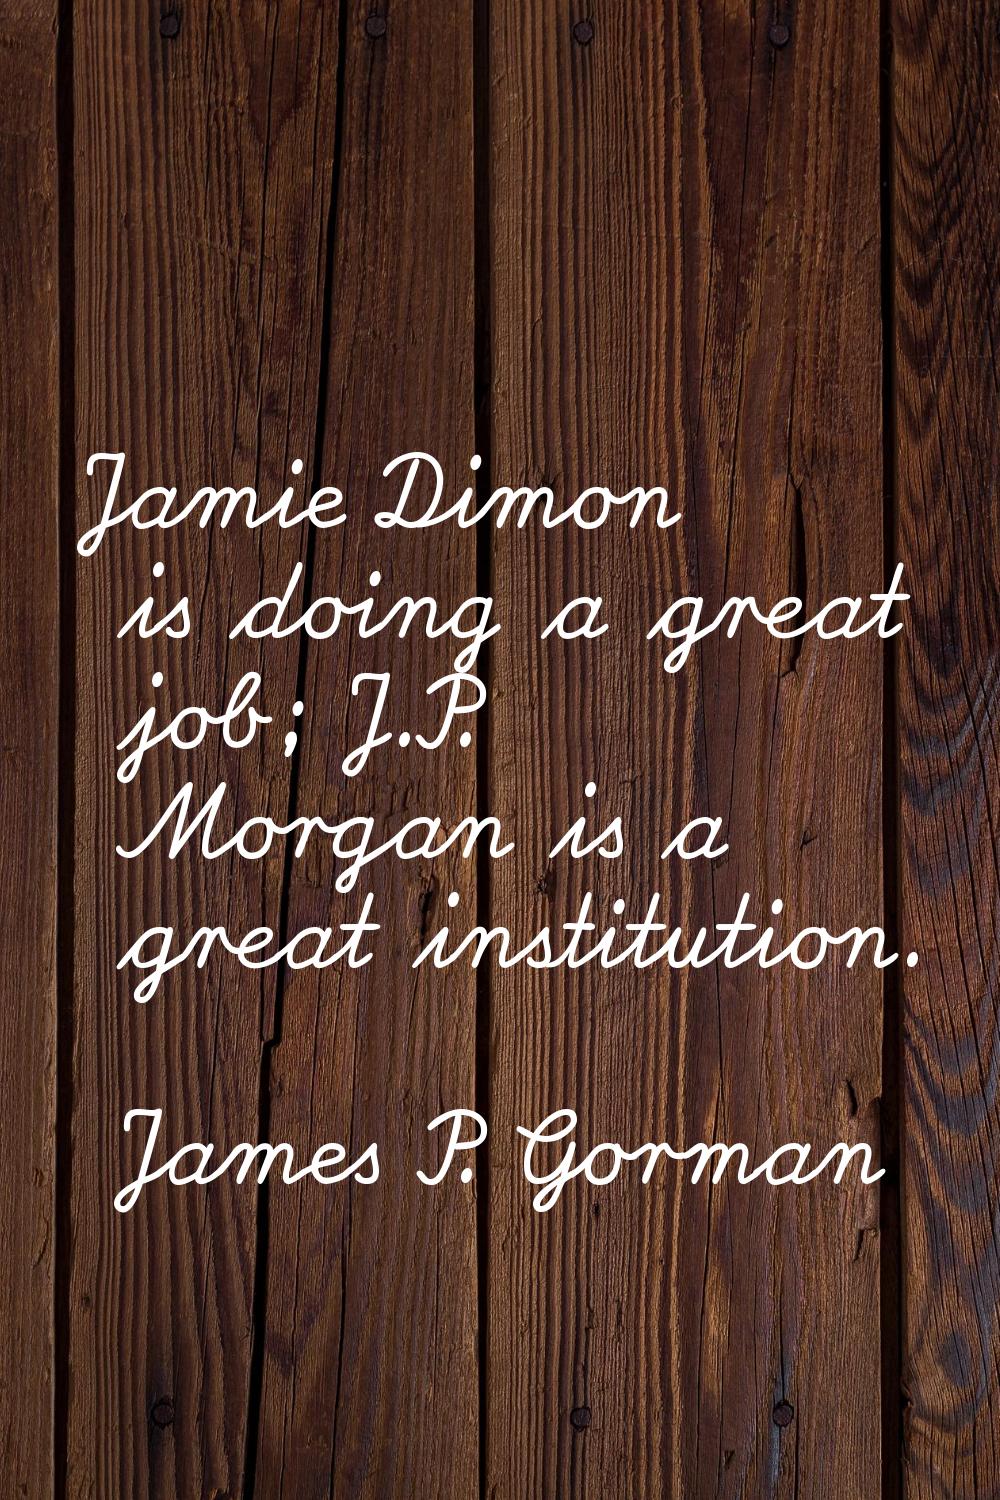 Jamie Dimon is doing a great job; J.P. Morgan is a great institution.